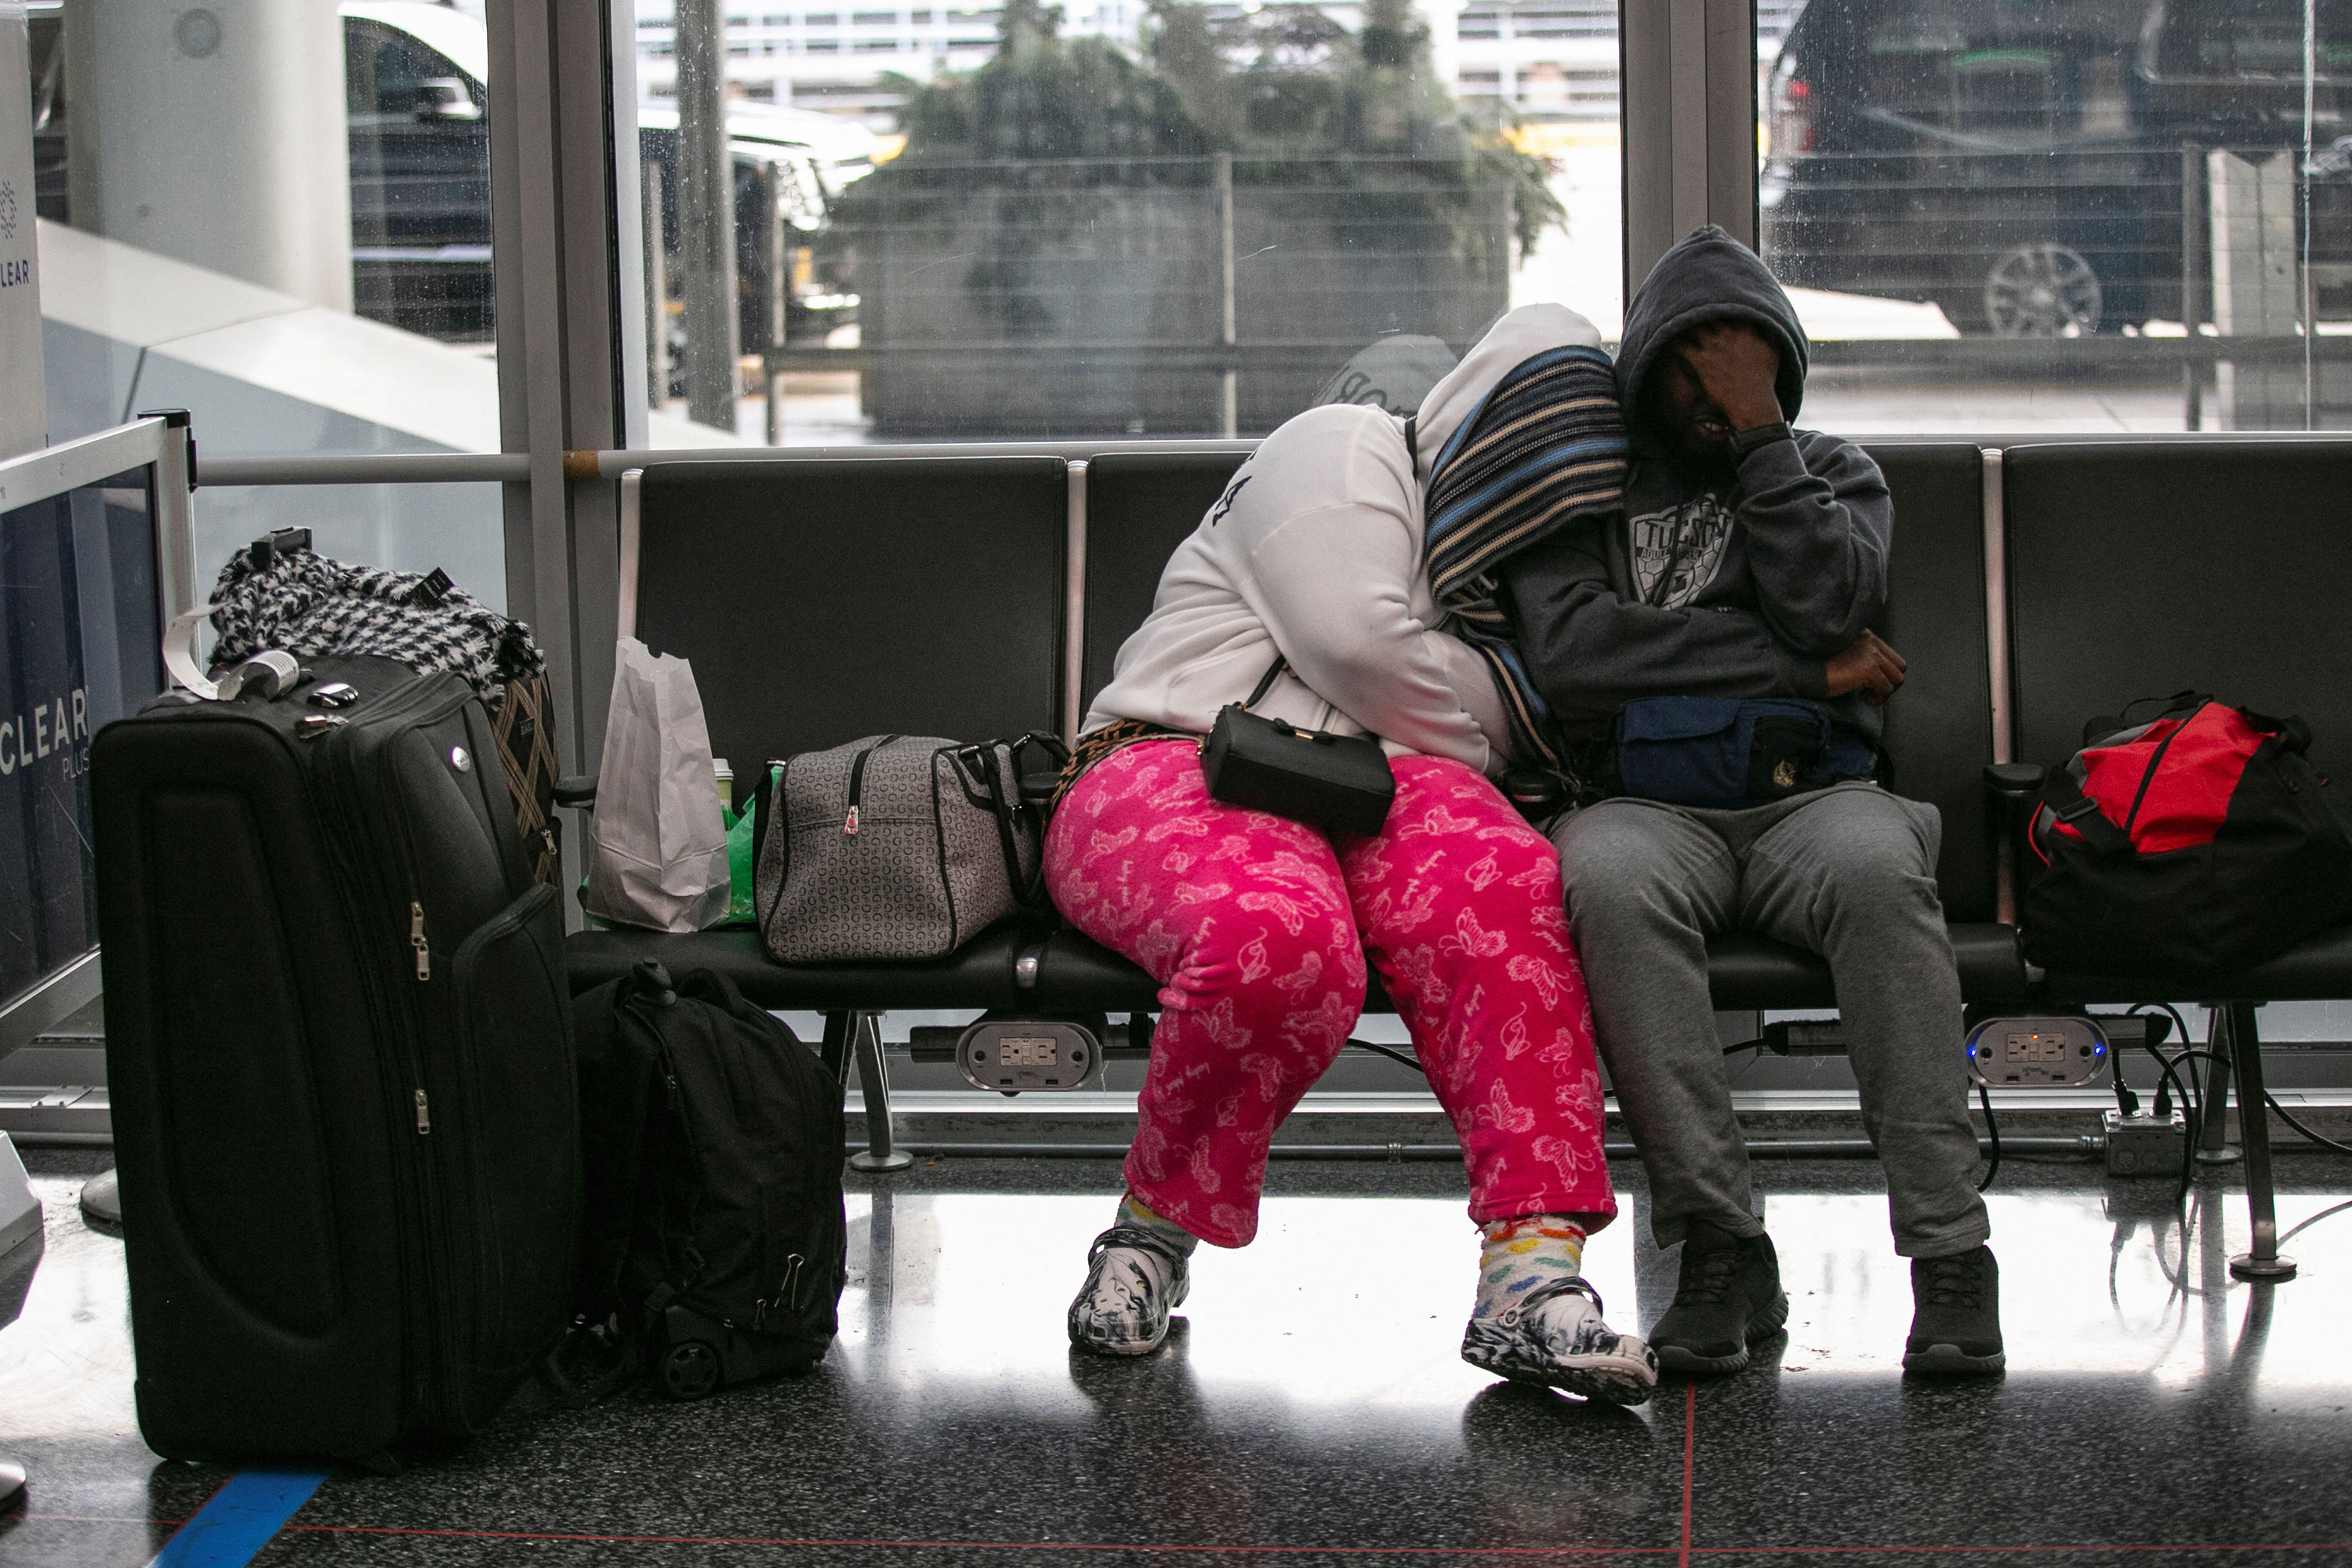 Passengers wait for the resumption of flights at O'Hare International Airport in Chicago on Wednesday.